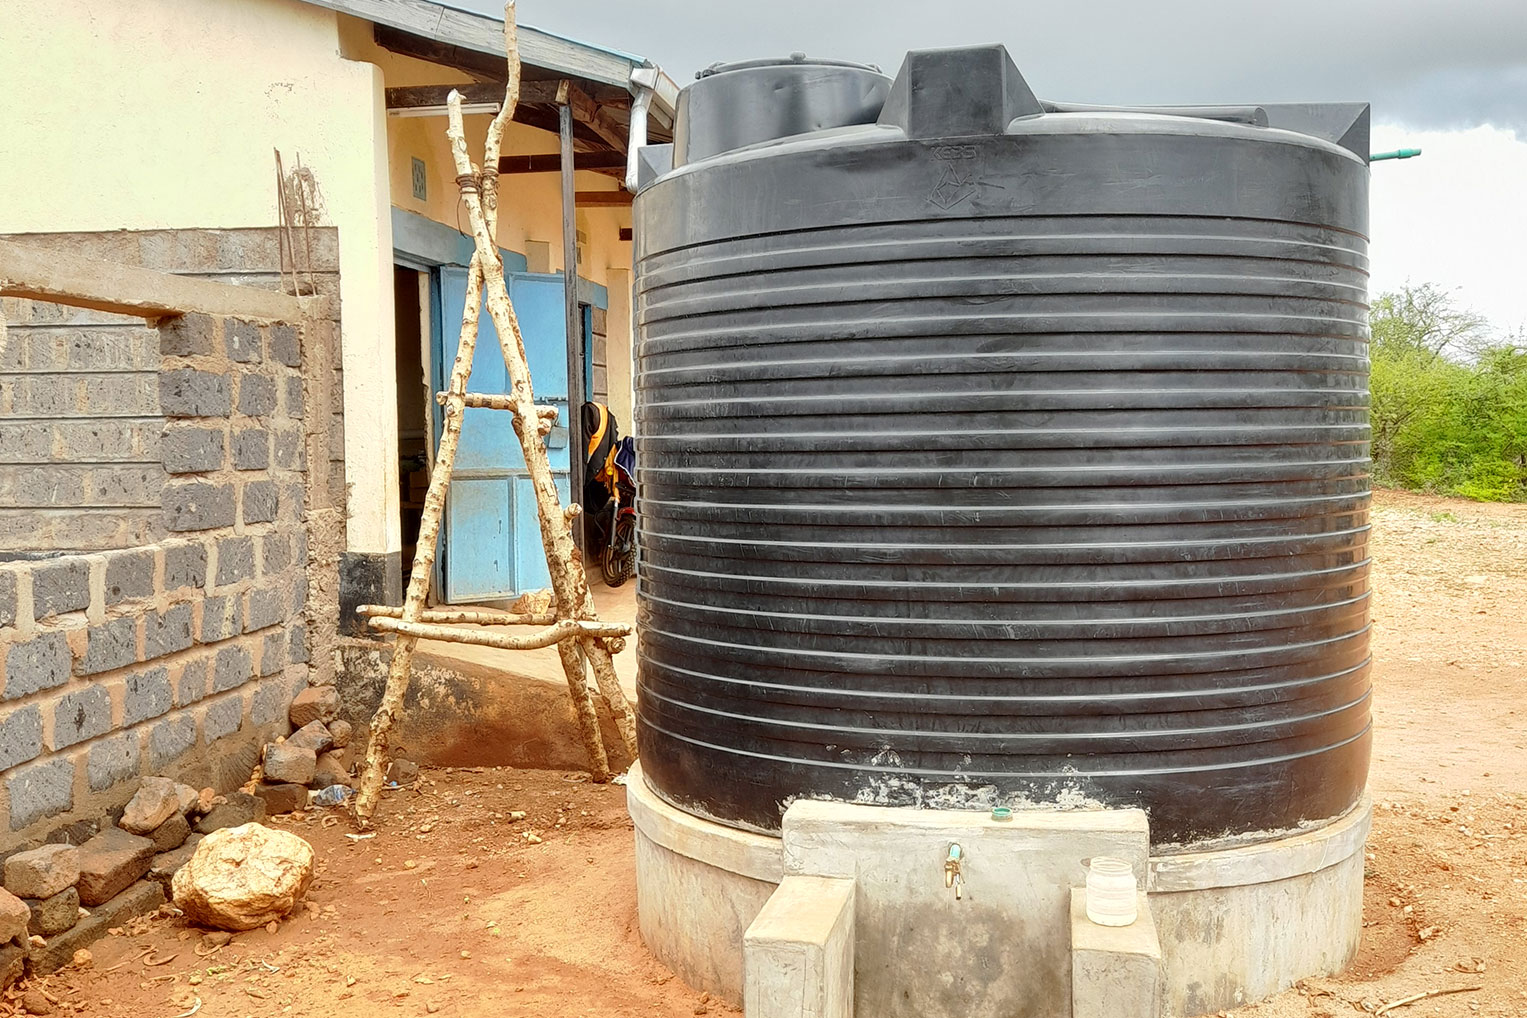 A freshwater tank provides a store of clean water for students.